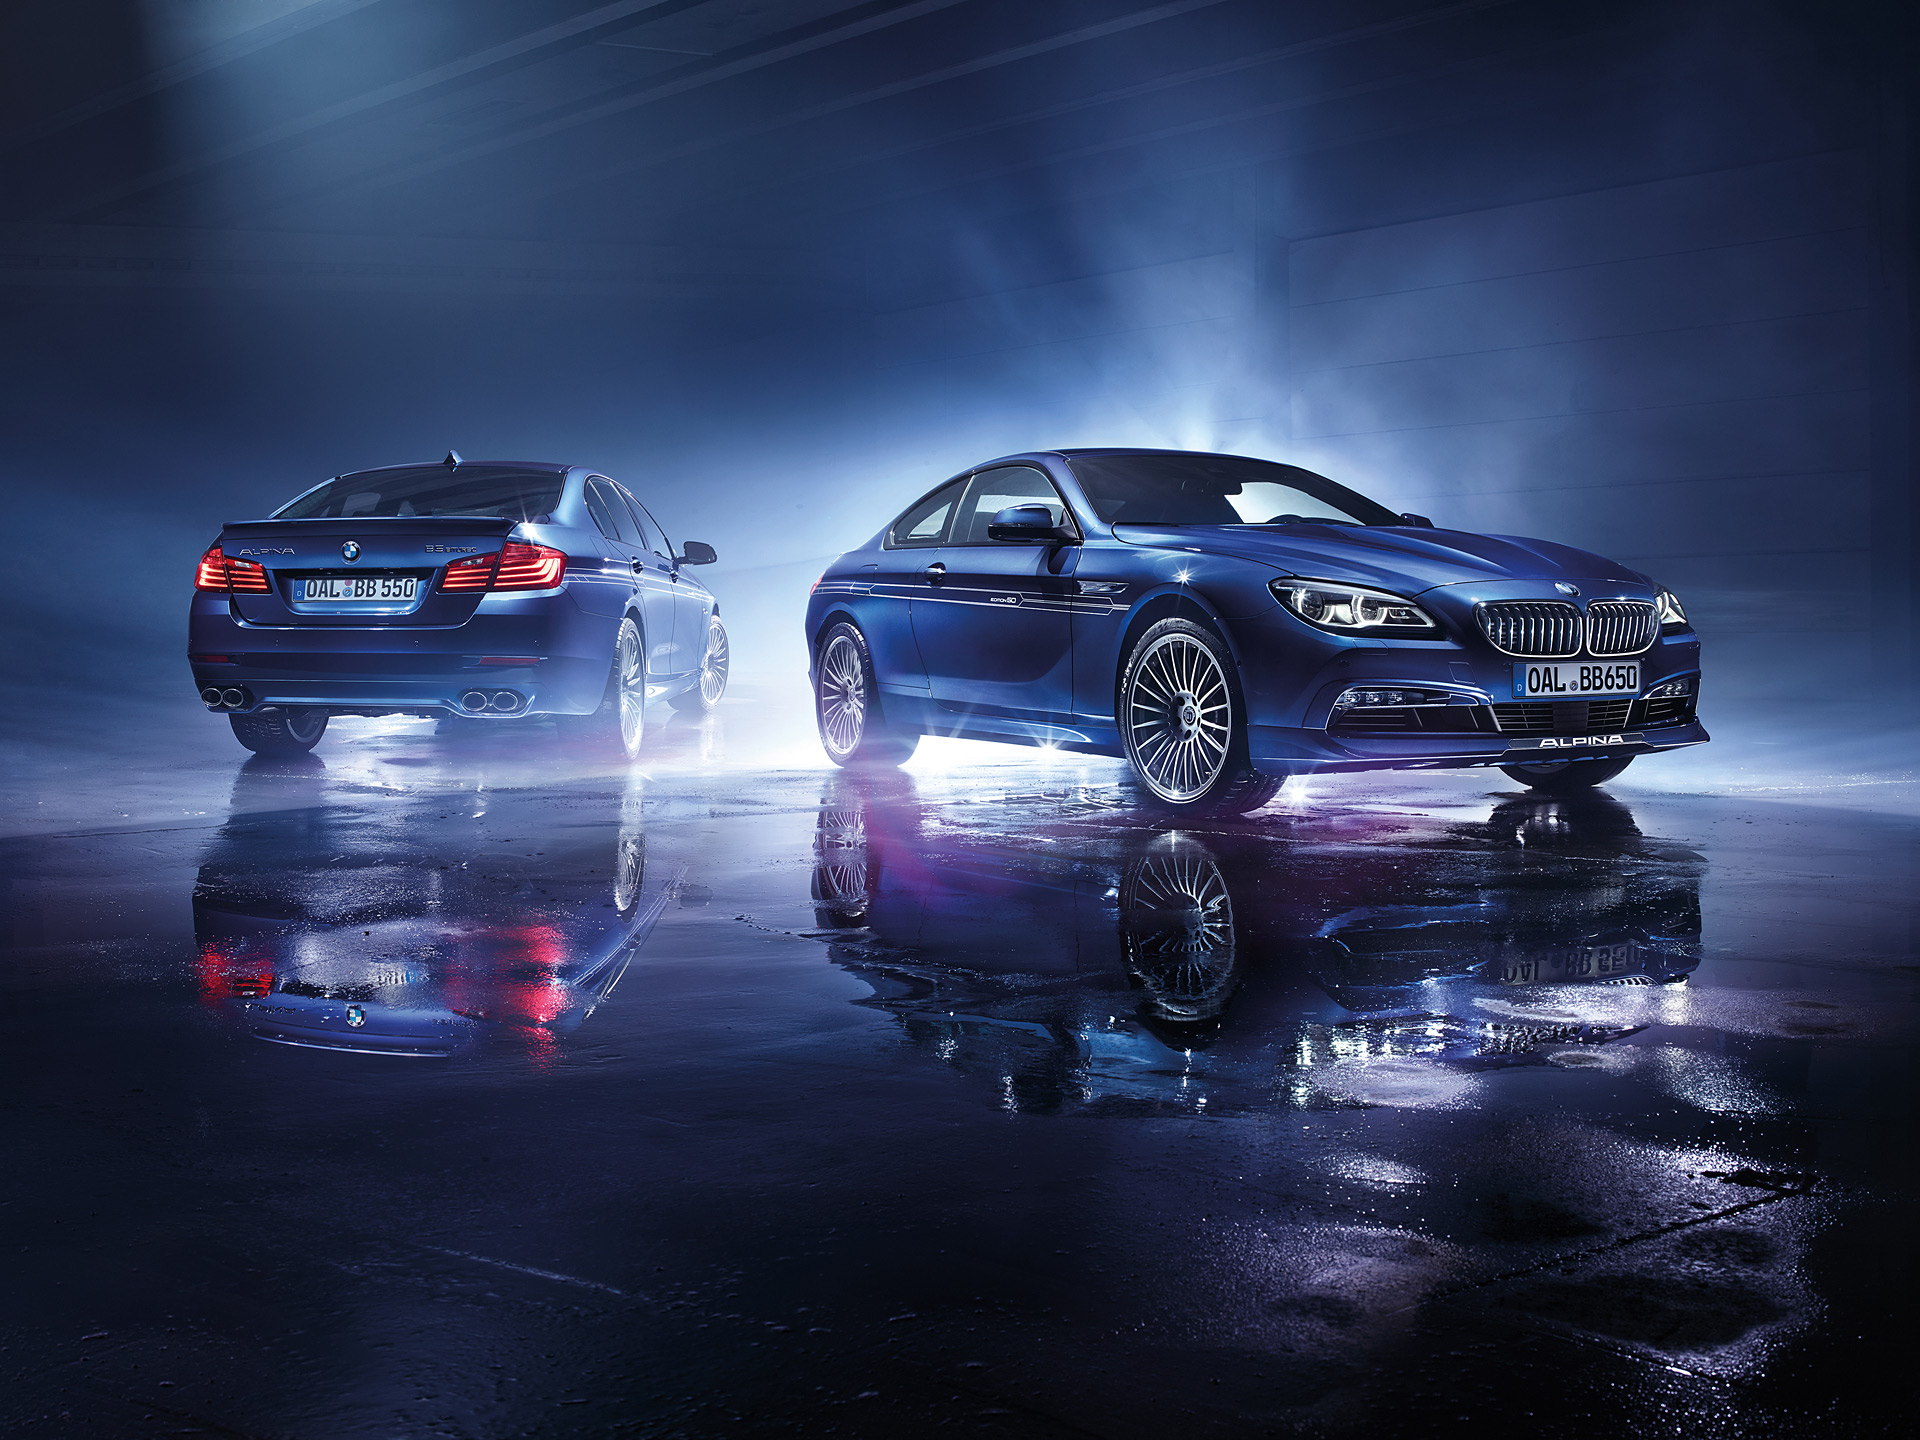  Alpina B6 Bi Turbo Coupe Edition 50 HQ Background Wallpapers